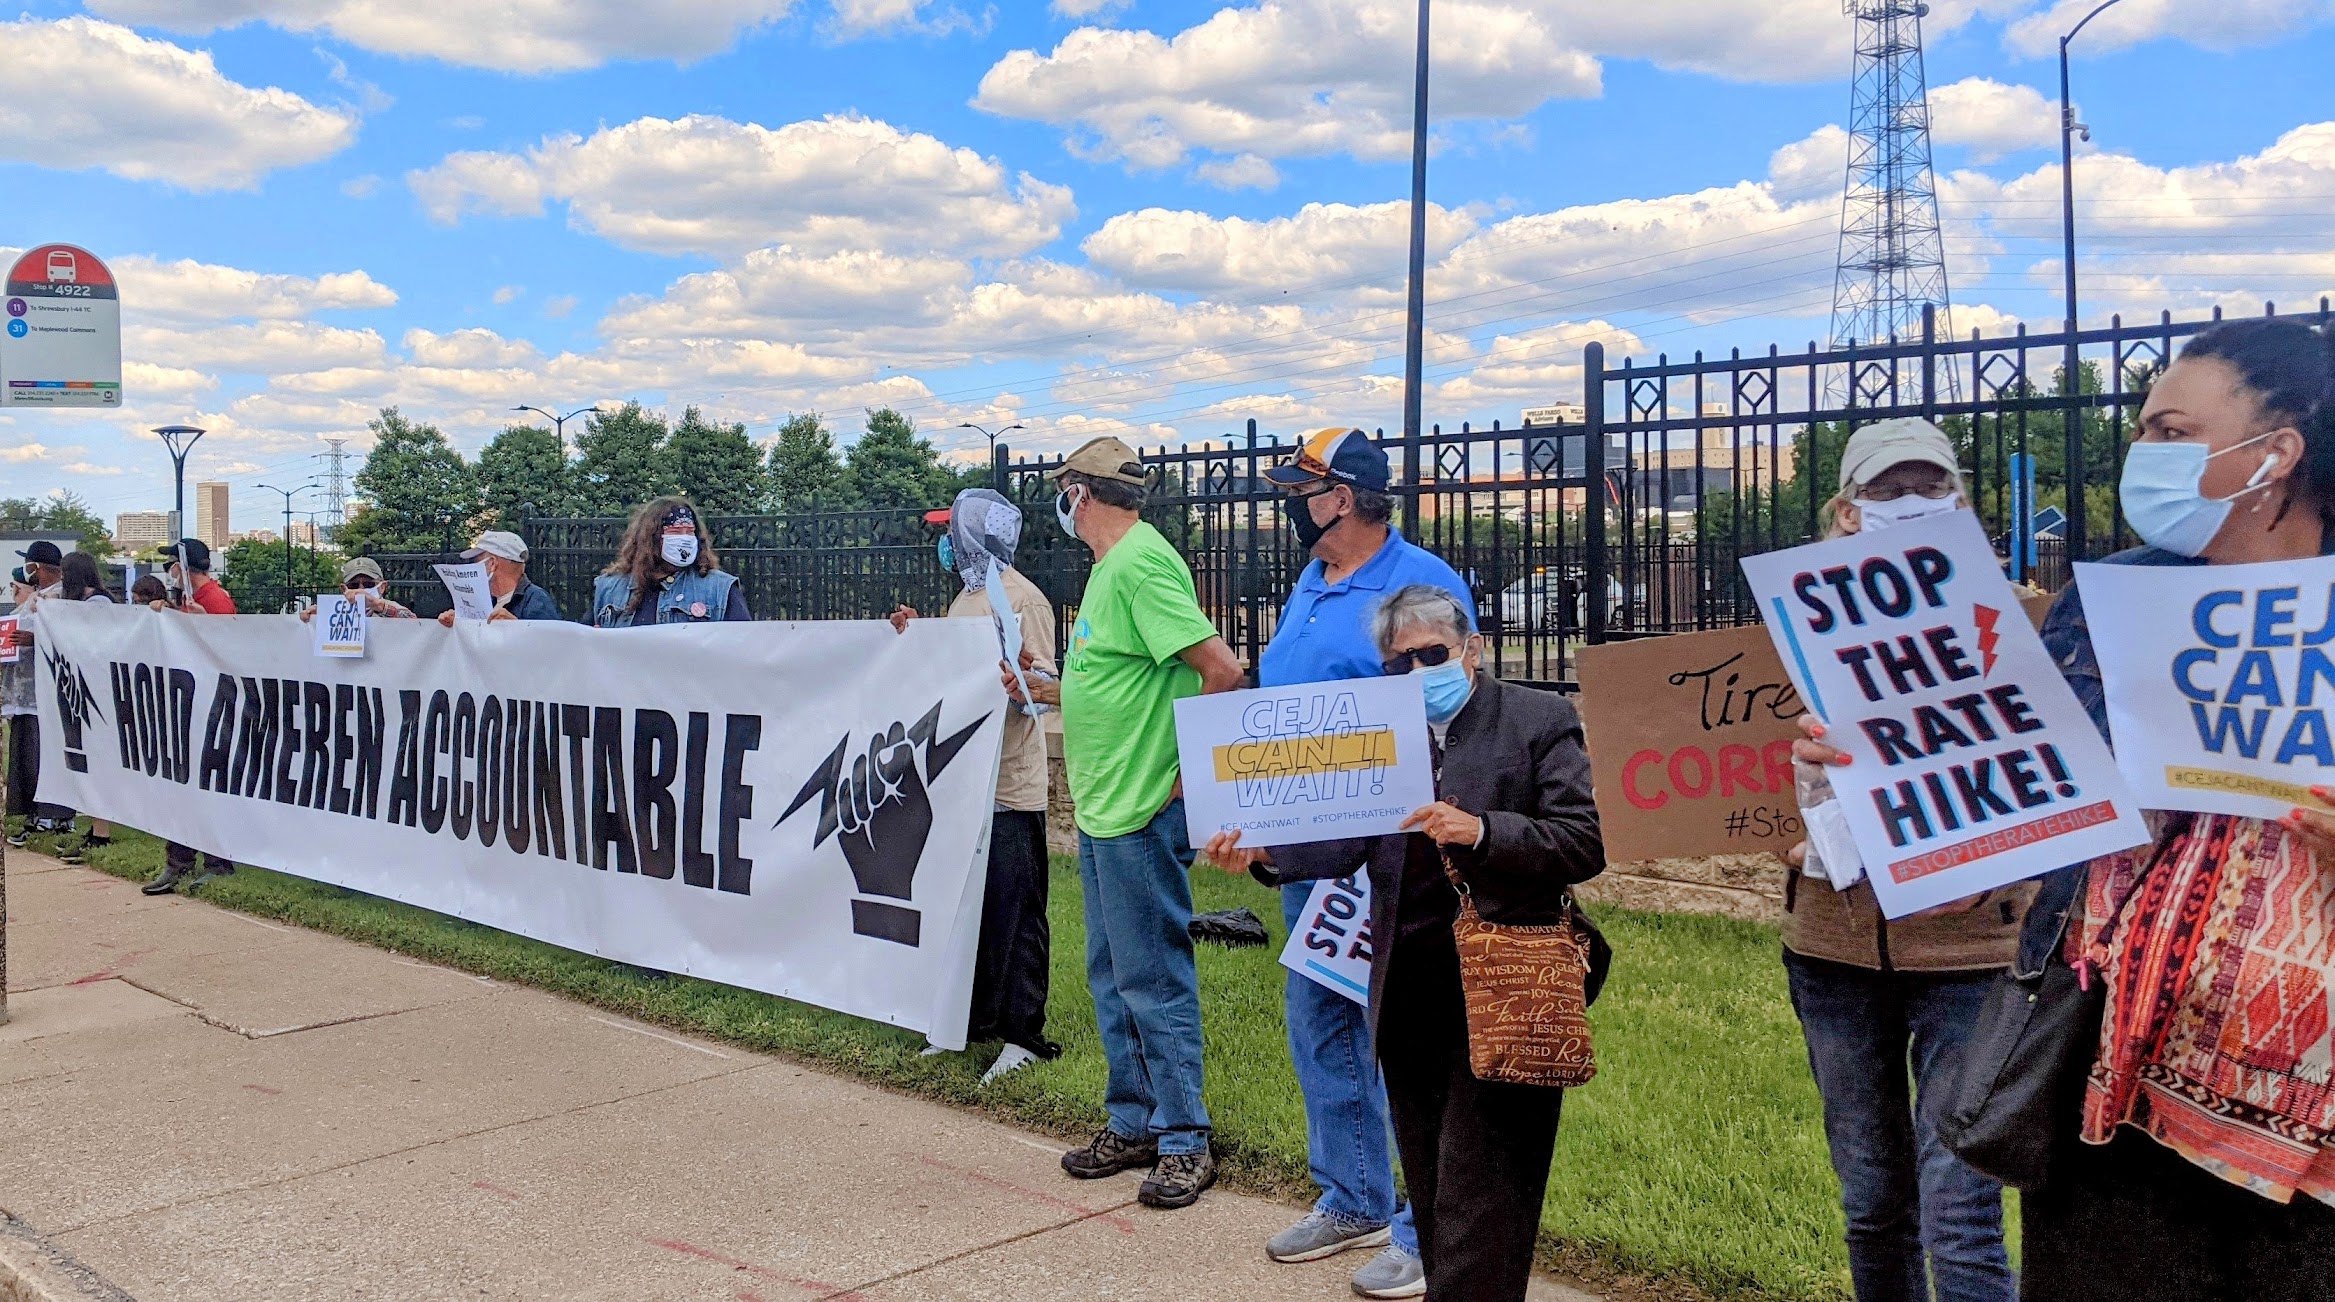 Activists hold a sign that reads, "Hold Ameren Accountable."